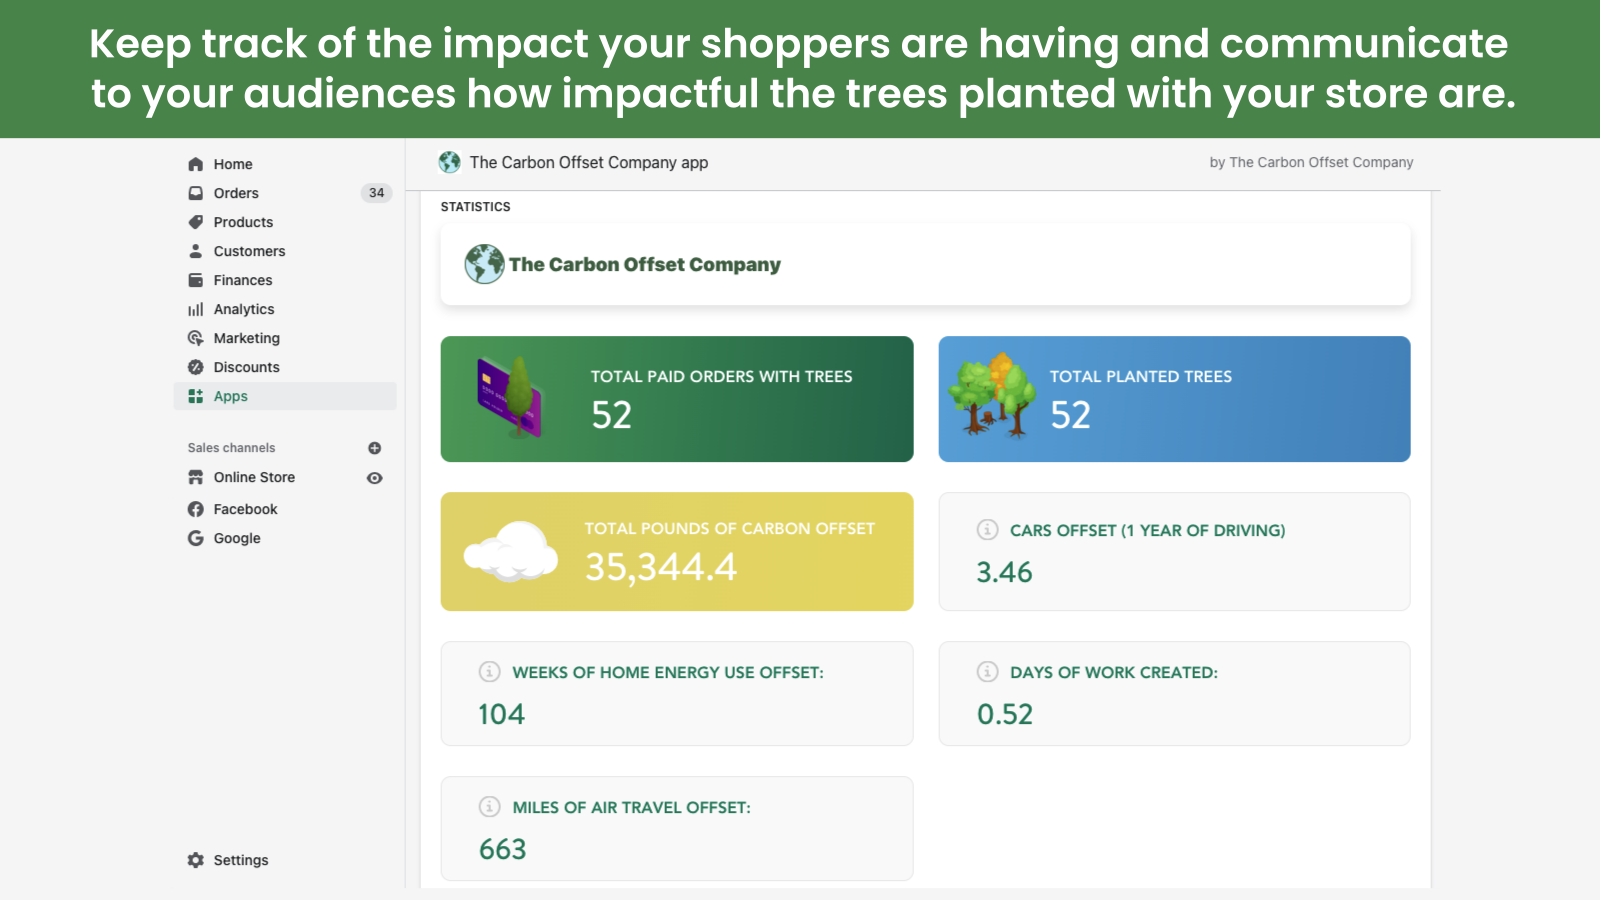 Store Impact Statistics on the Environment